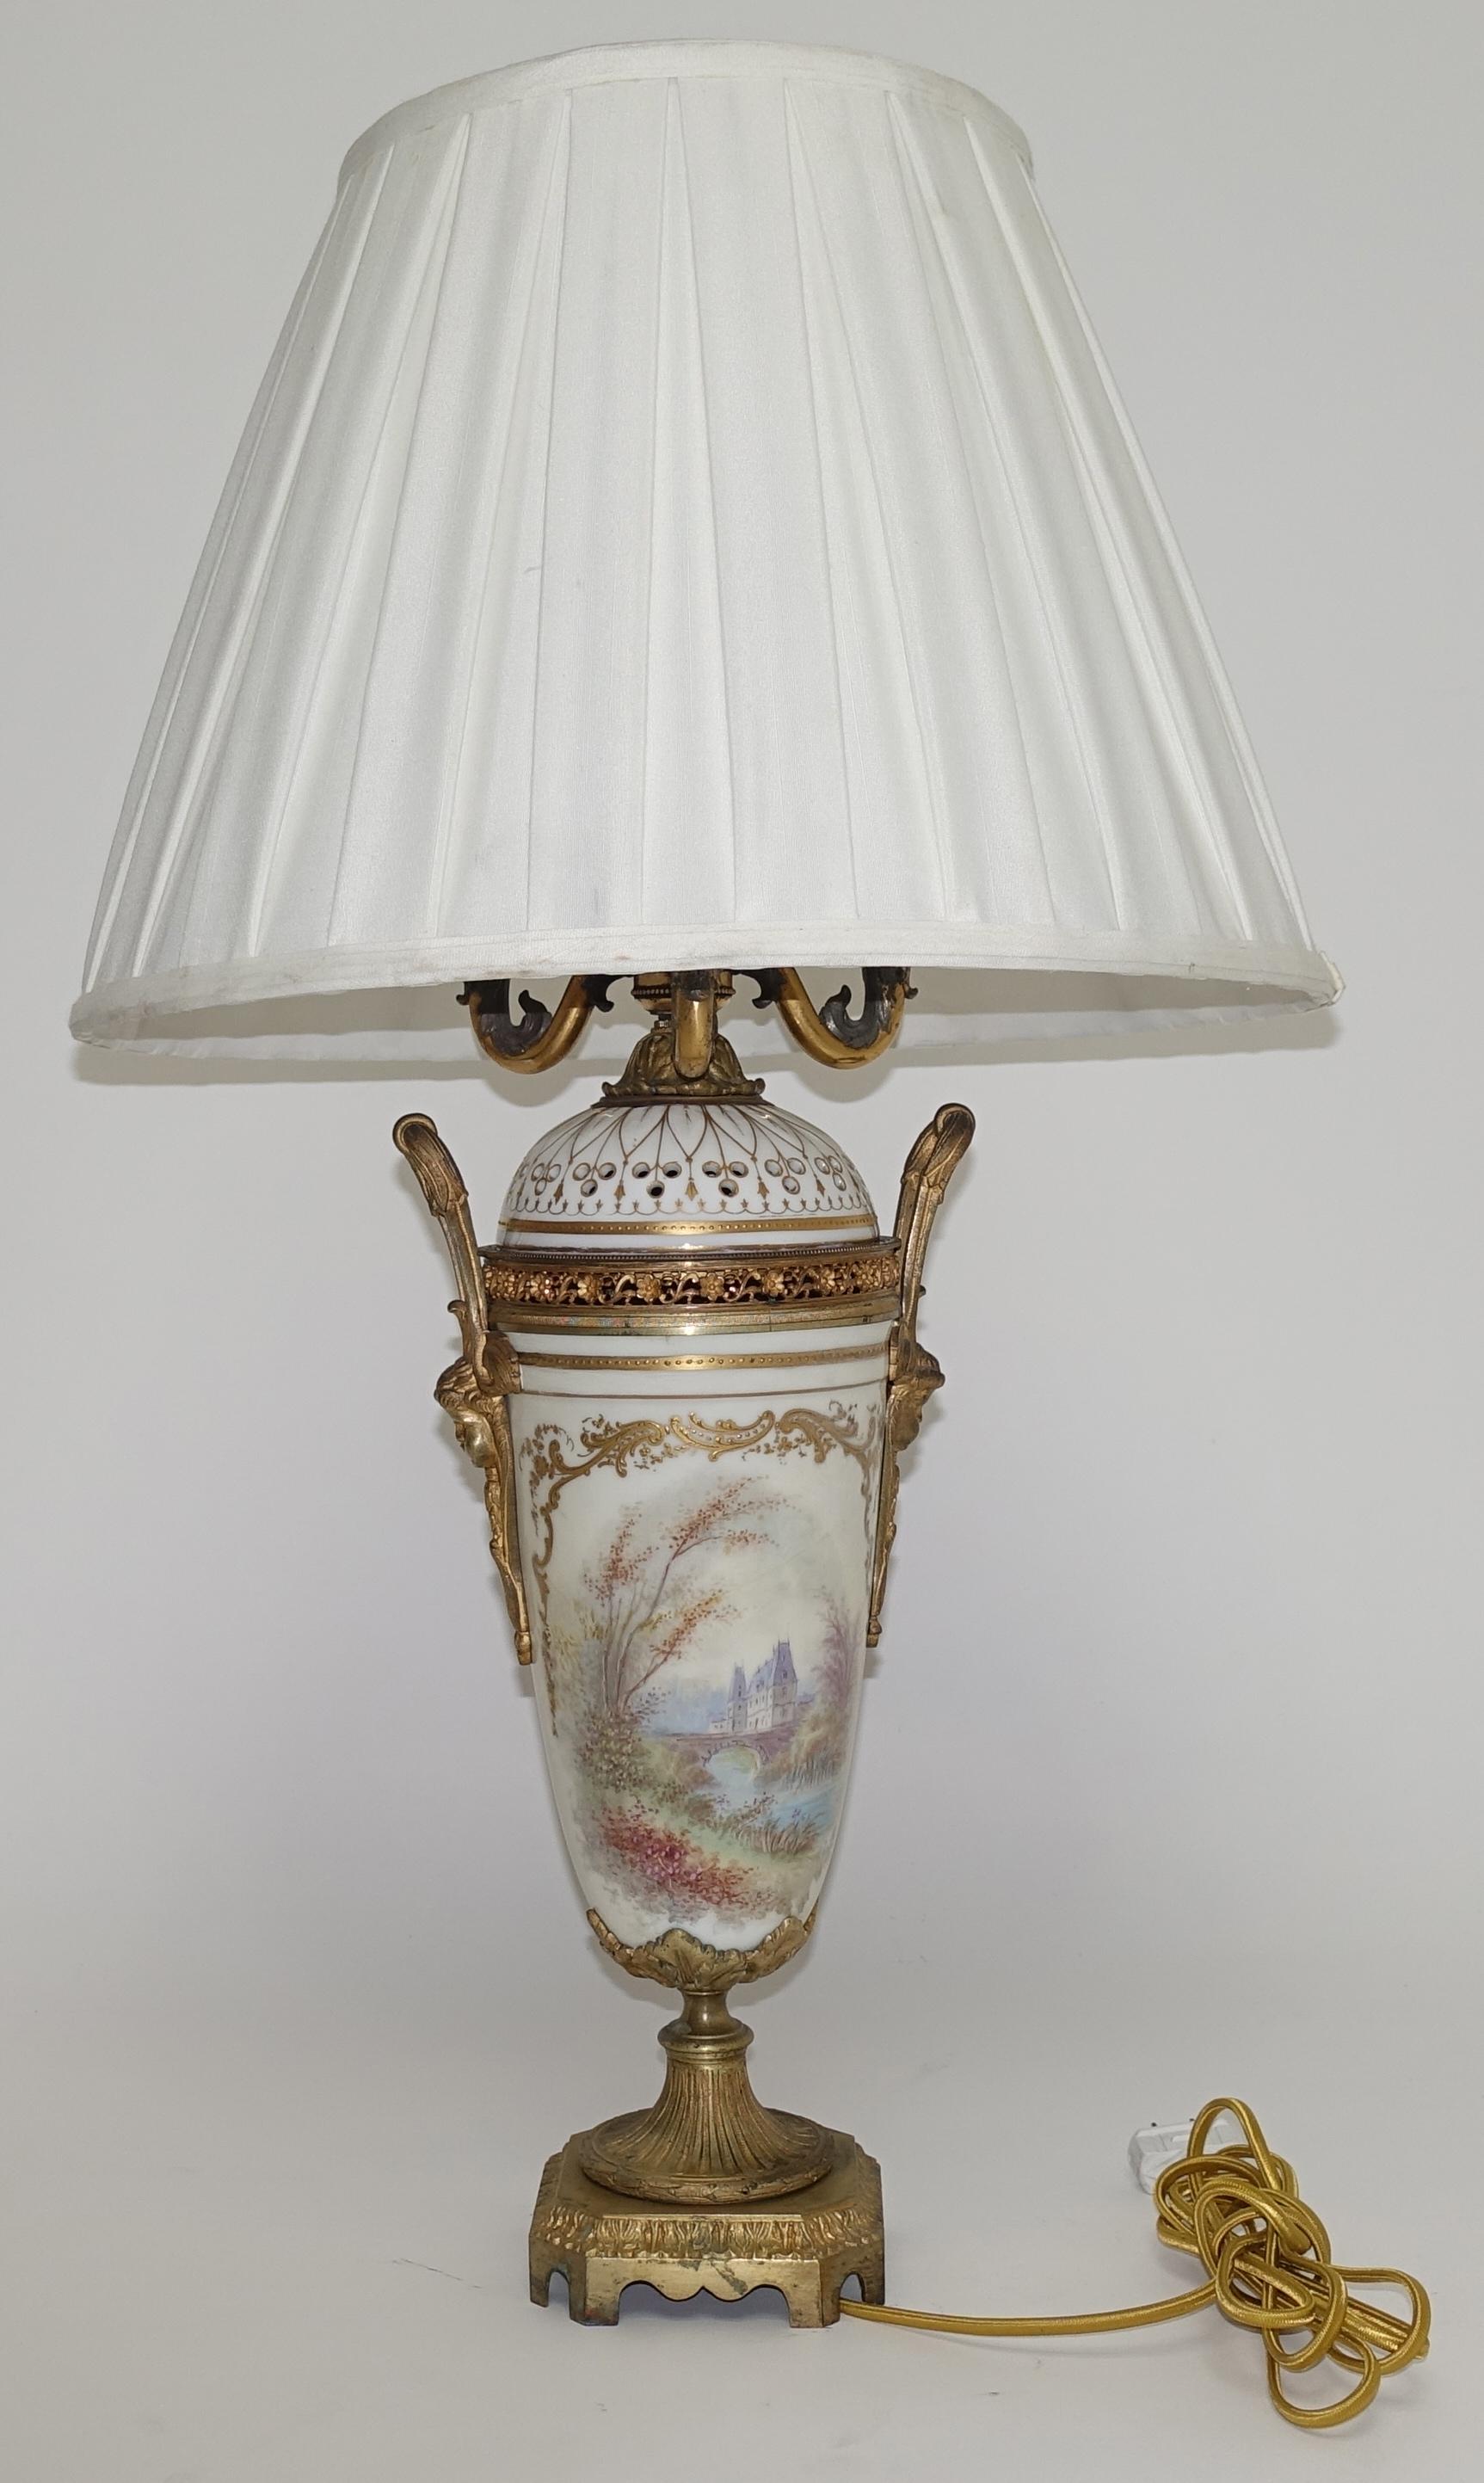 19th century Sèvres ormolu-mounted porcelain urn with cover, later wired for a lamp. The hand-painted urn depicts a couple and a chateau in the countryside.
Marked inside Sèvres 1844 'Chateau des Tulleries'
New wiring.